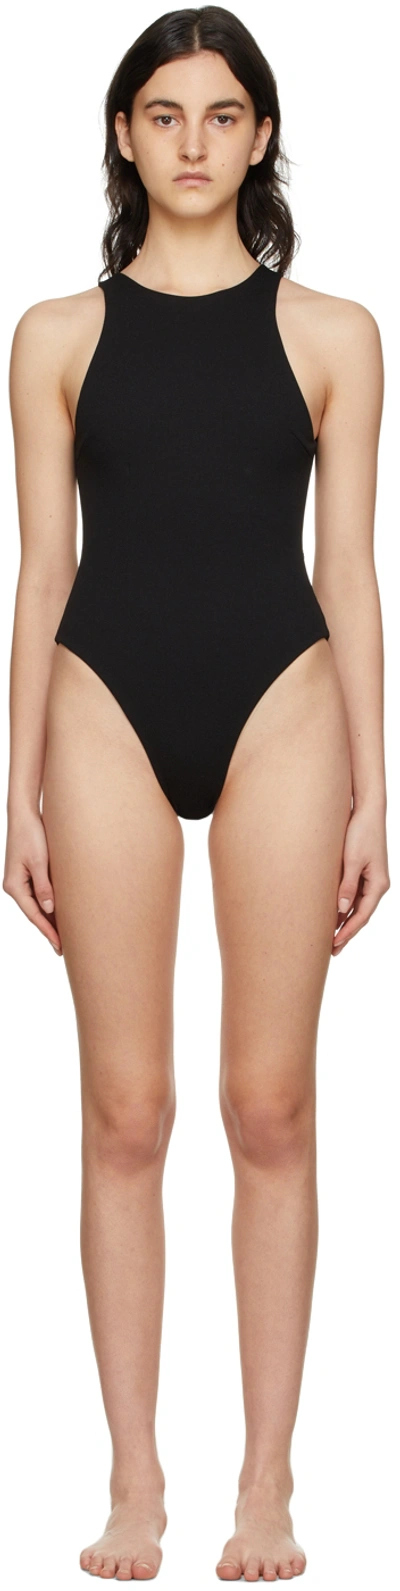 Haight Black Twy One-piece Swimsuit